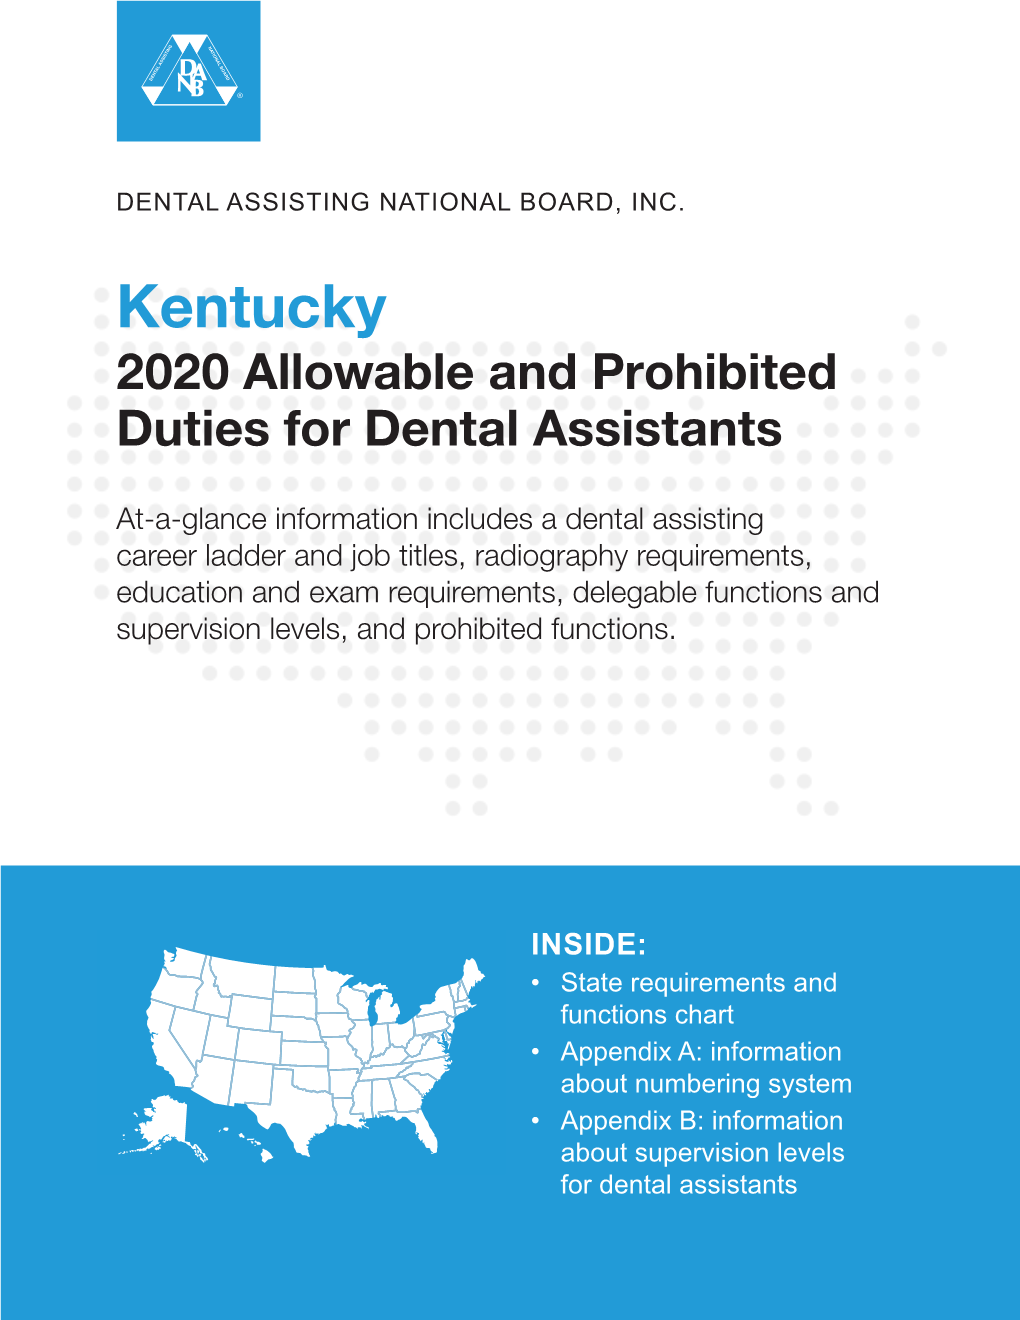 Kentucky 2020 Allowable and Prohibited Duties for Dental Assistants